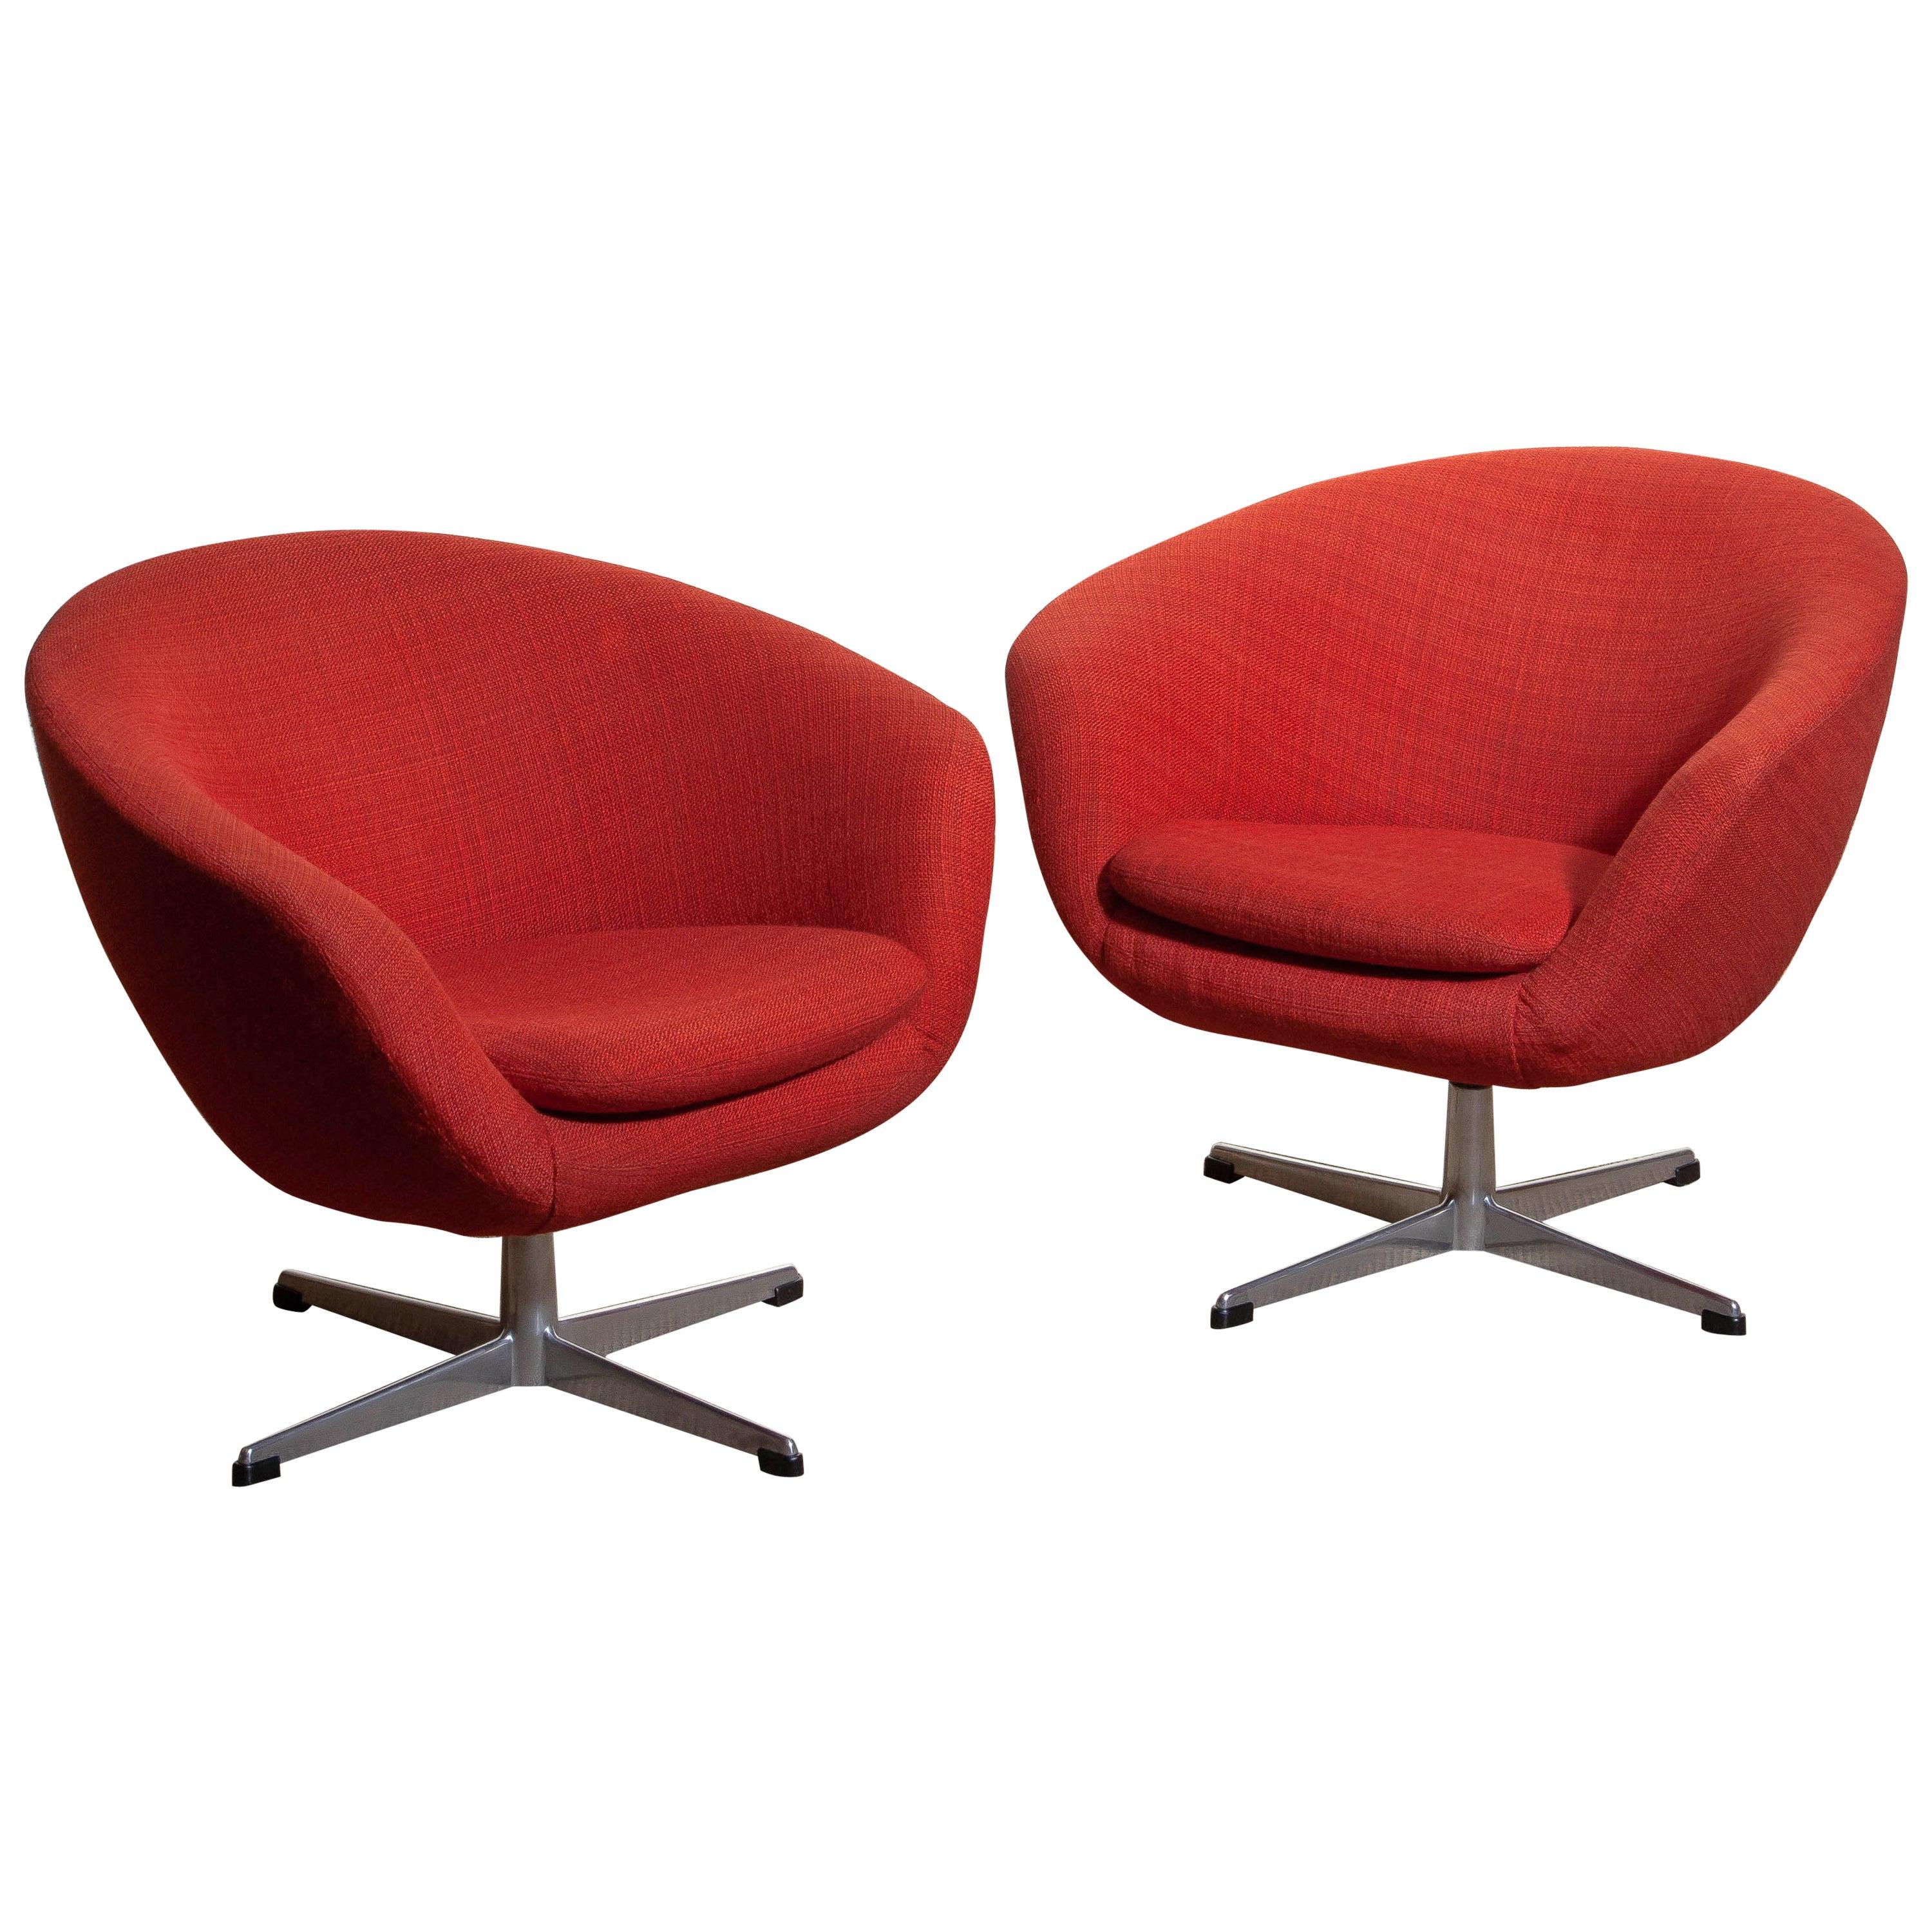 Aluminum 1960s, Pair of Swivel Lounge Chairs by Carl Eric Klote for Overman, Denmark